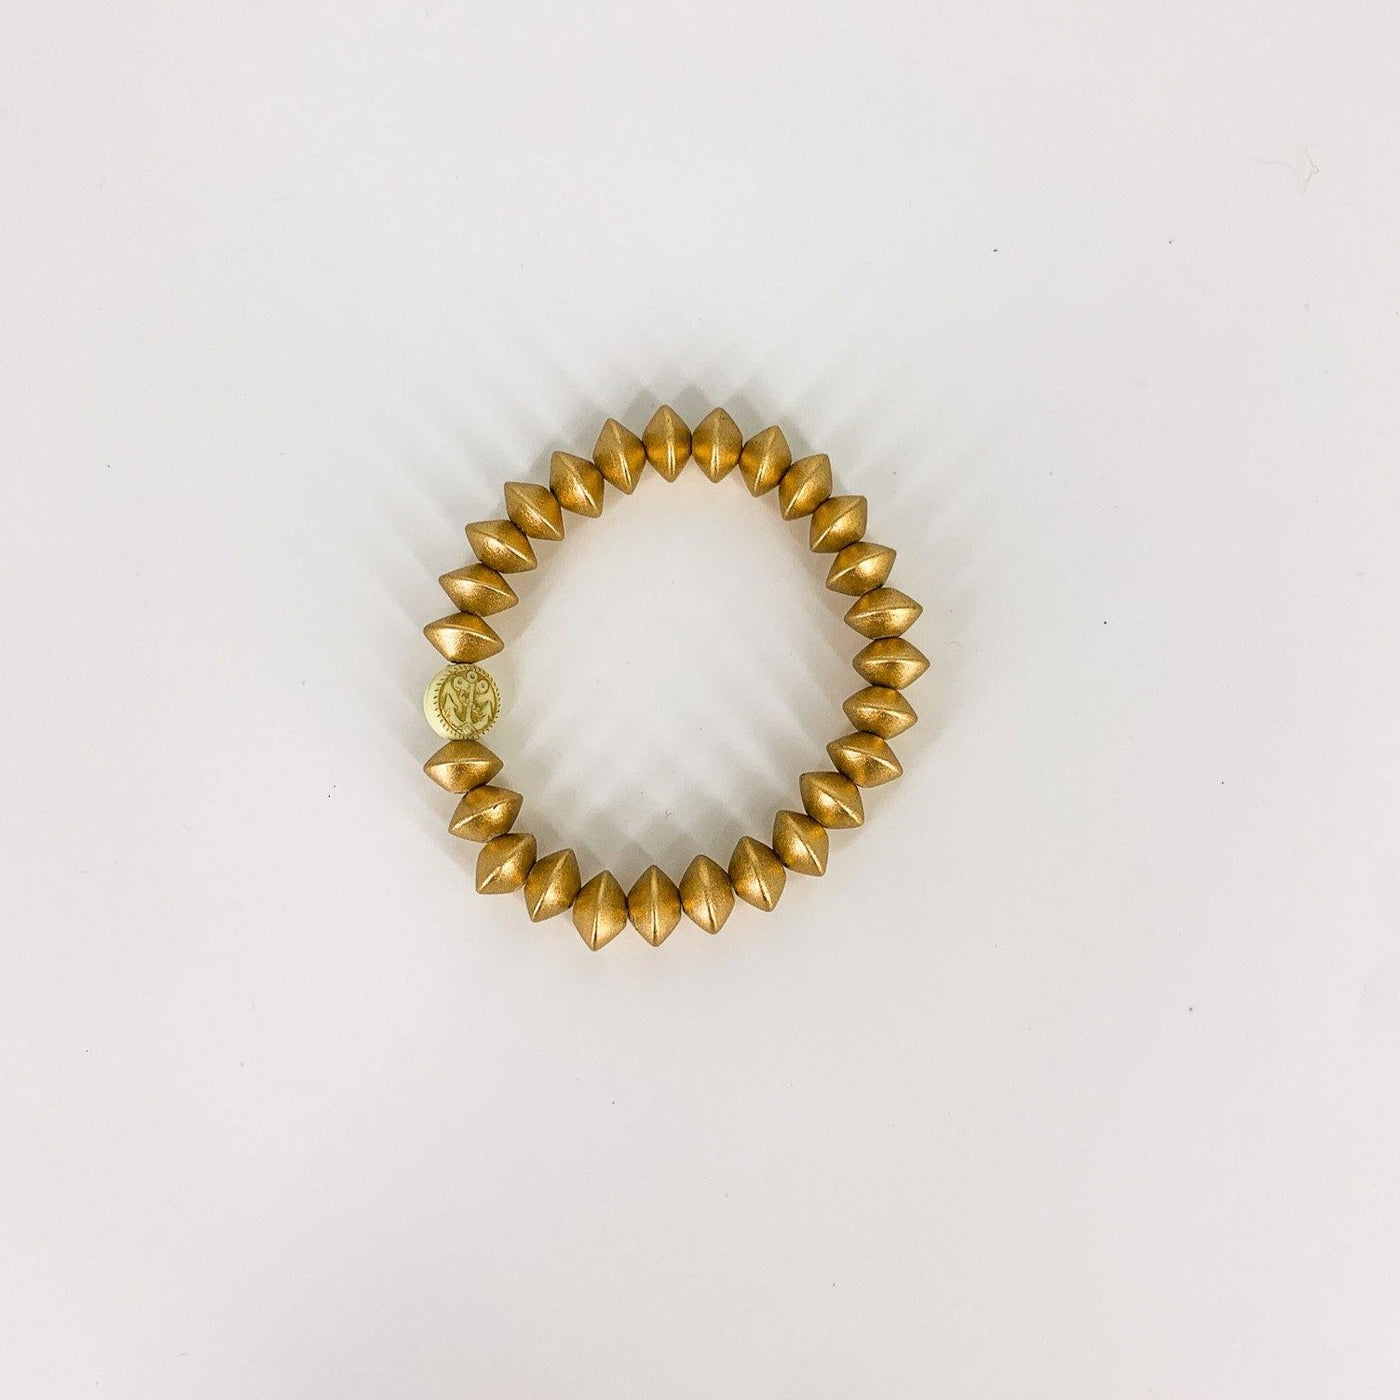 Gold conical beaded bracelet with an Anchor beads trademark bead